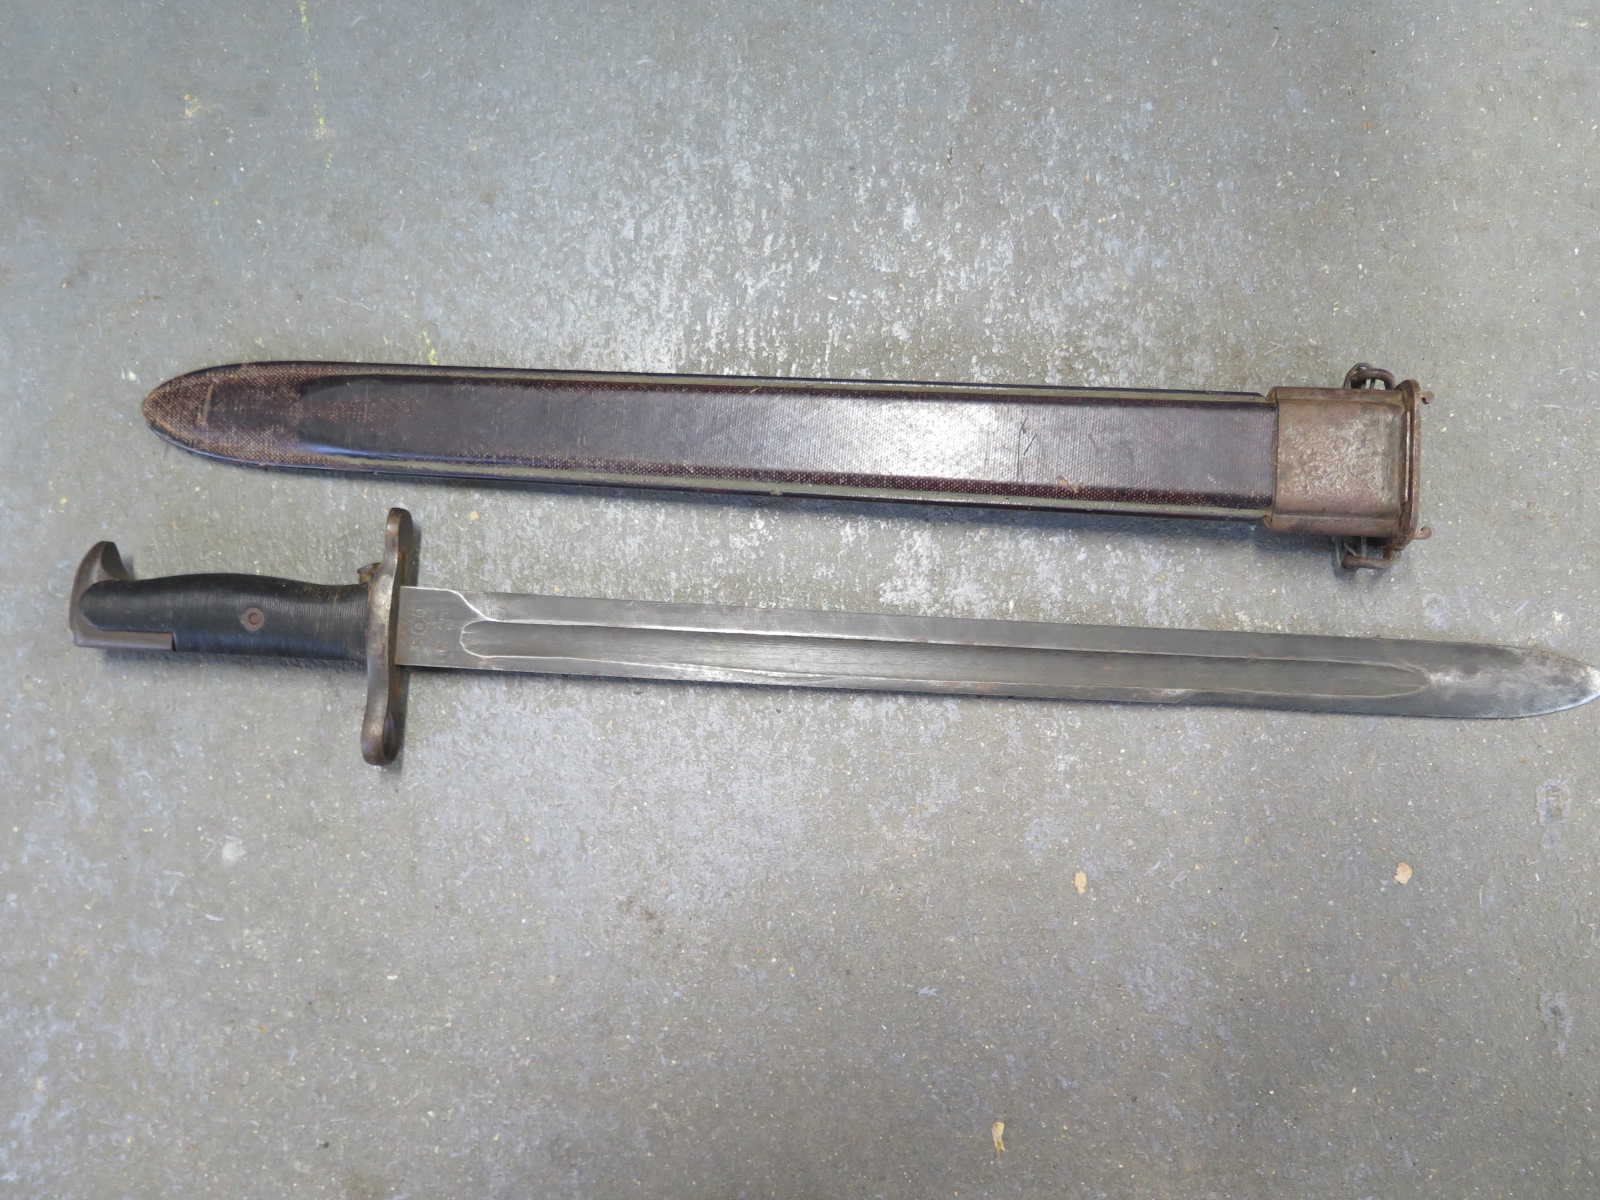 A 1942 US U.F.H. bayonet with original scabbard - total length 51. - Image 3 of 4